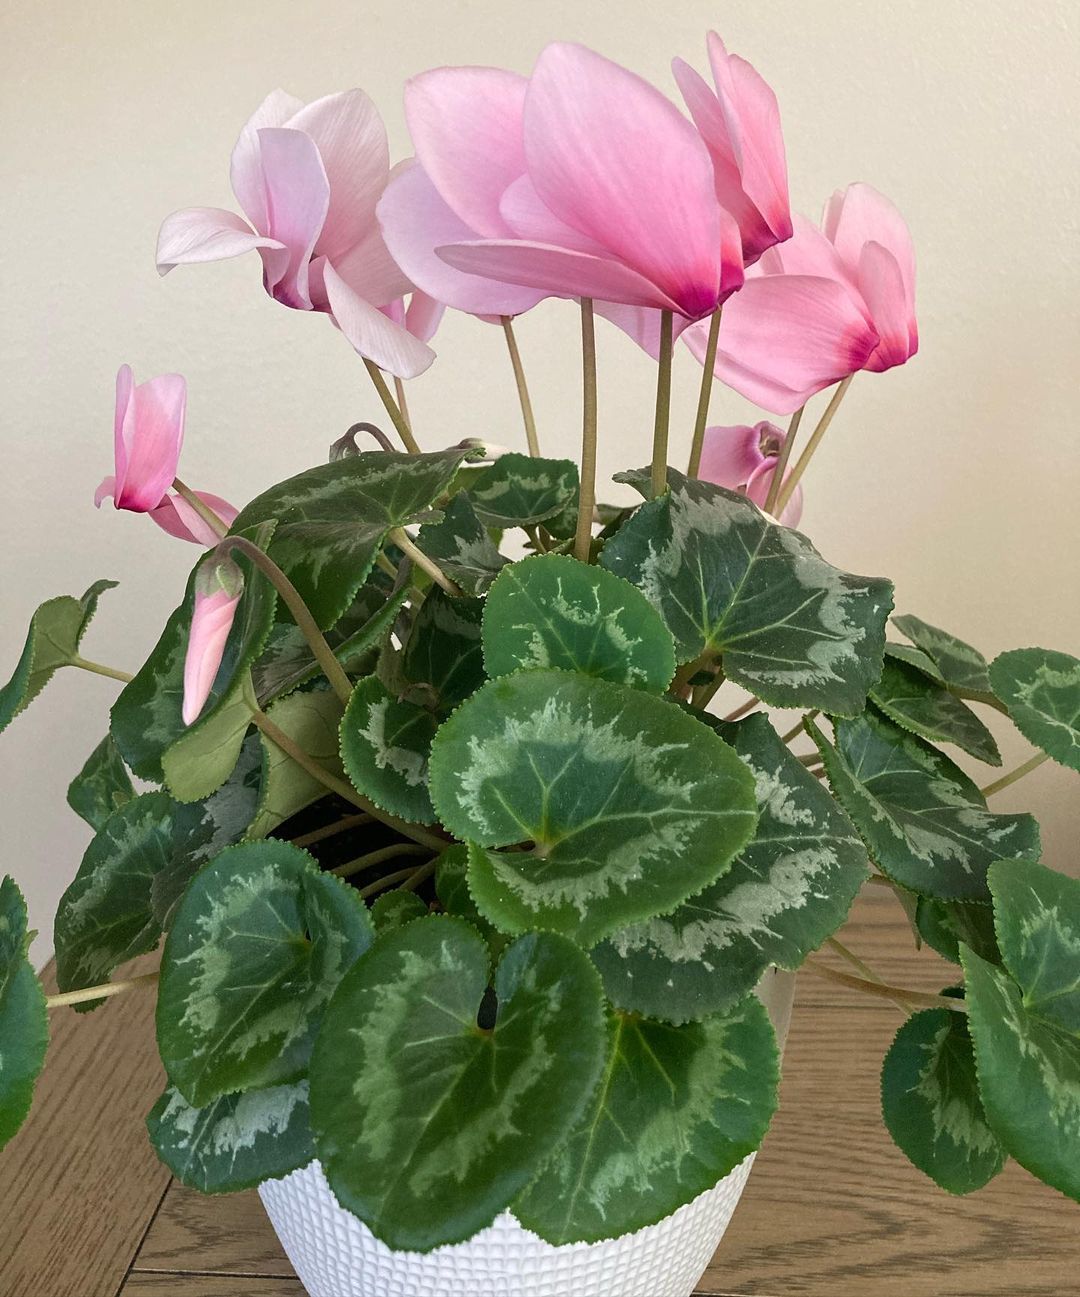 21 Types Of Cyclamen Pictorial Guide